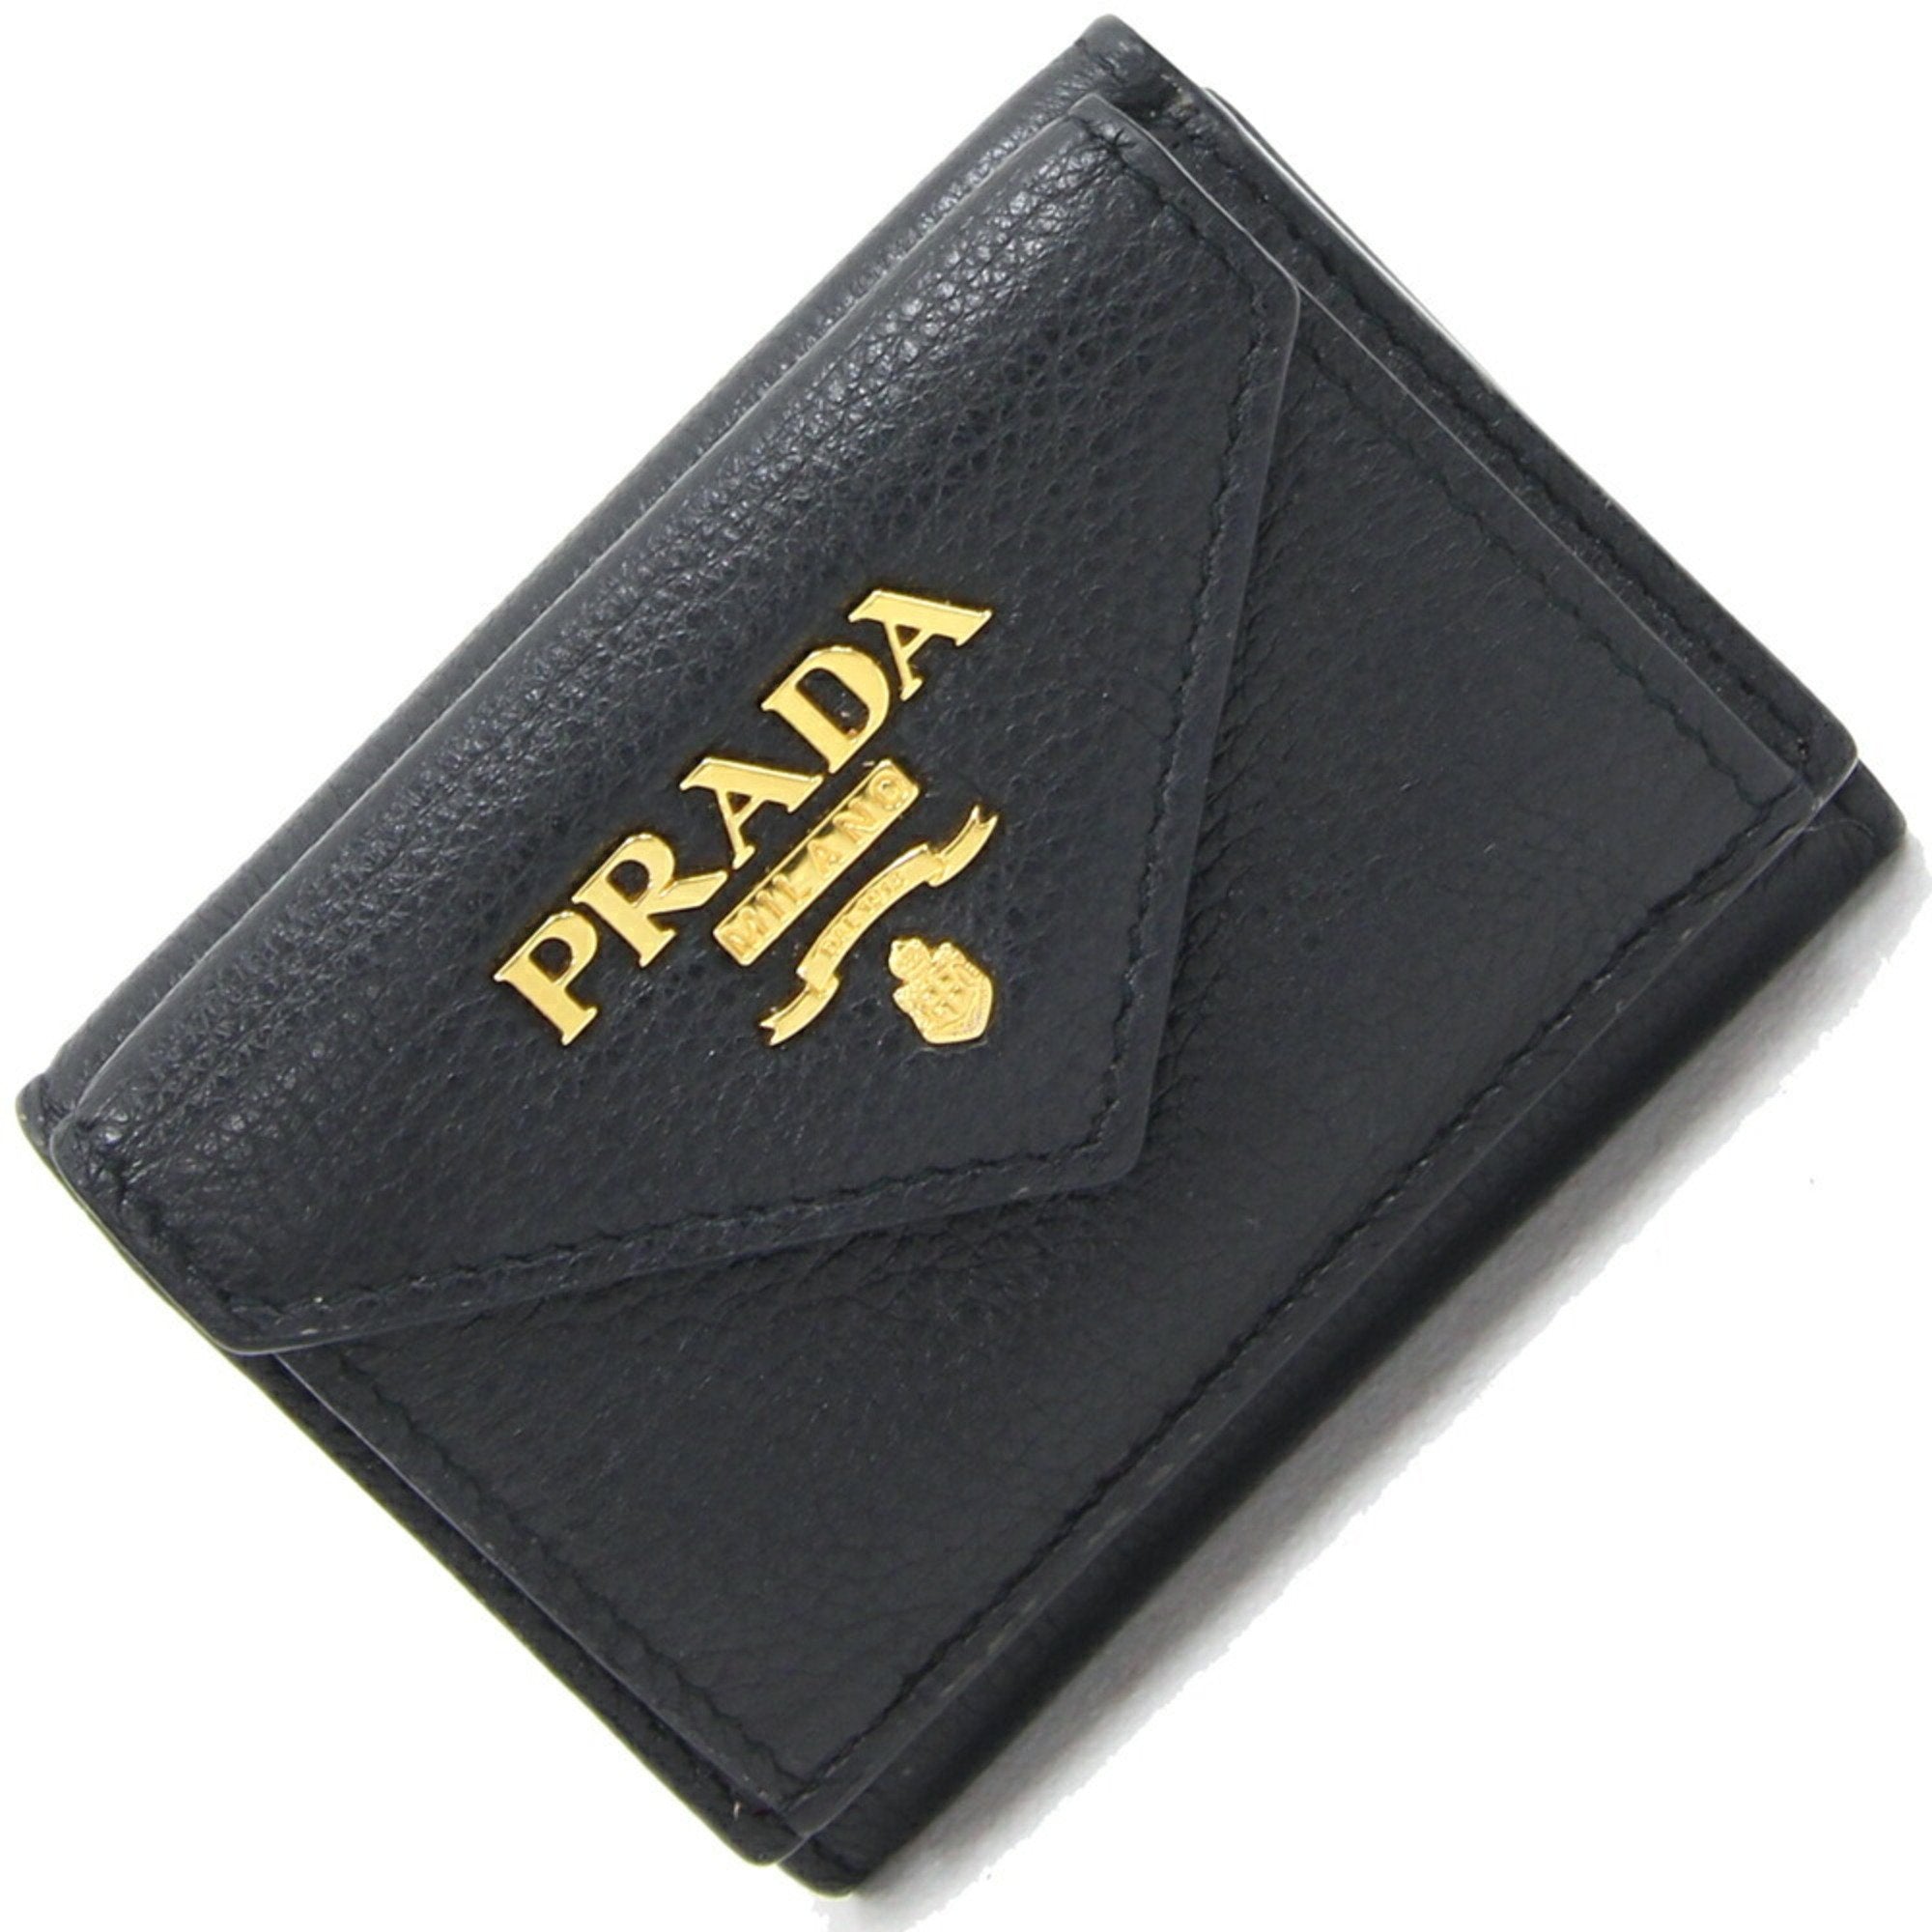 Tri-fold Wallet 1MH021 Black Leather Compact Women's